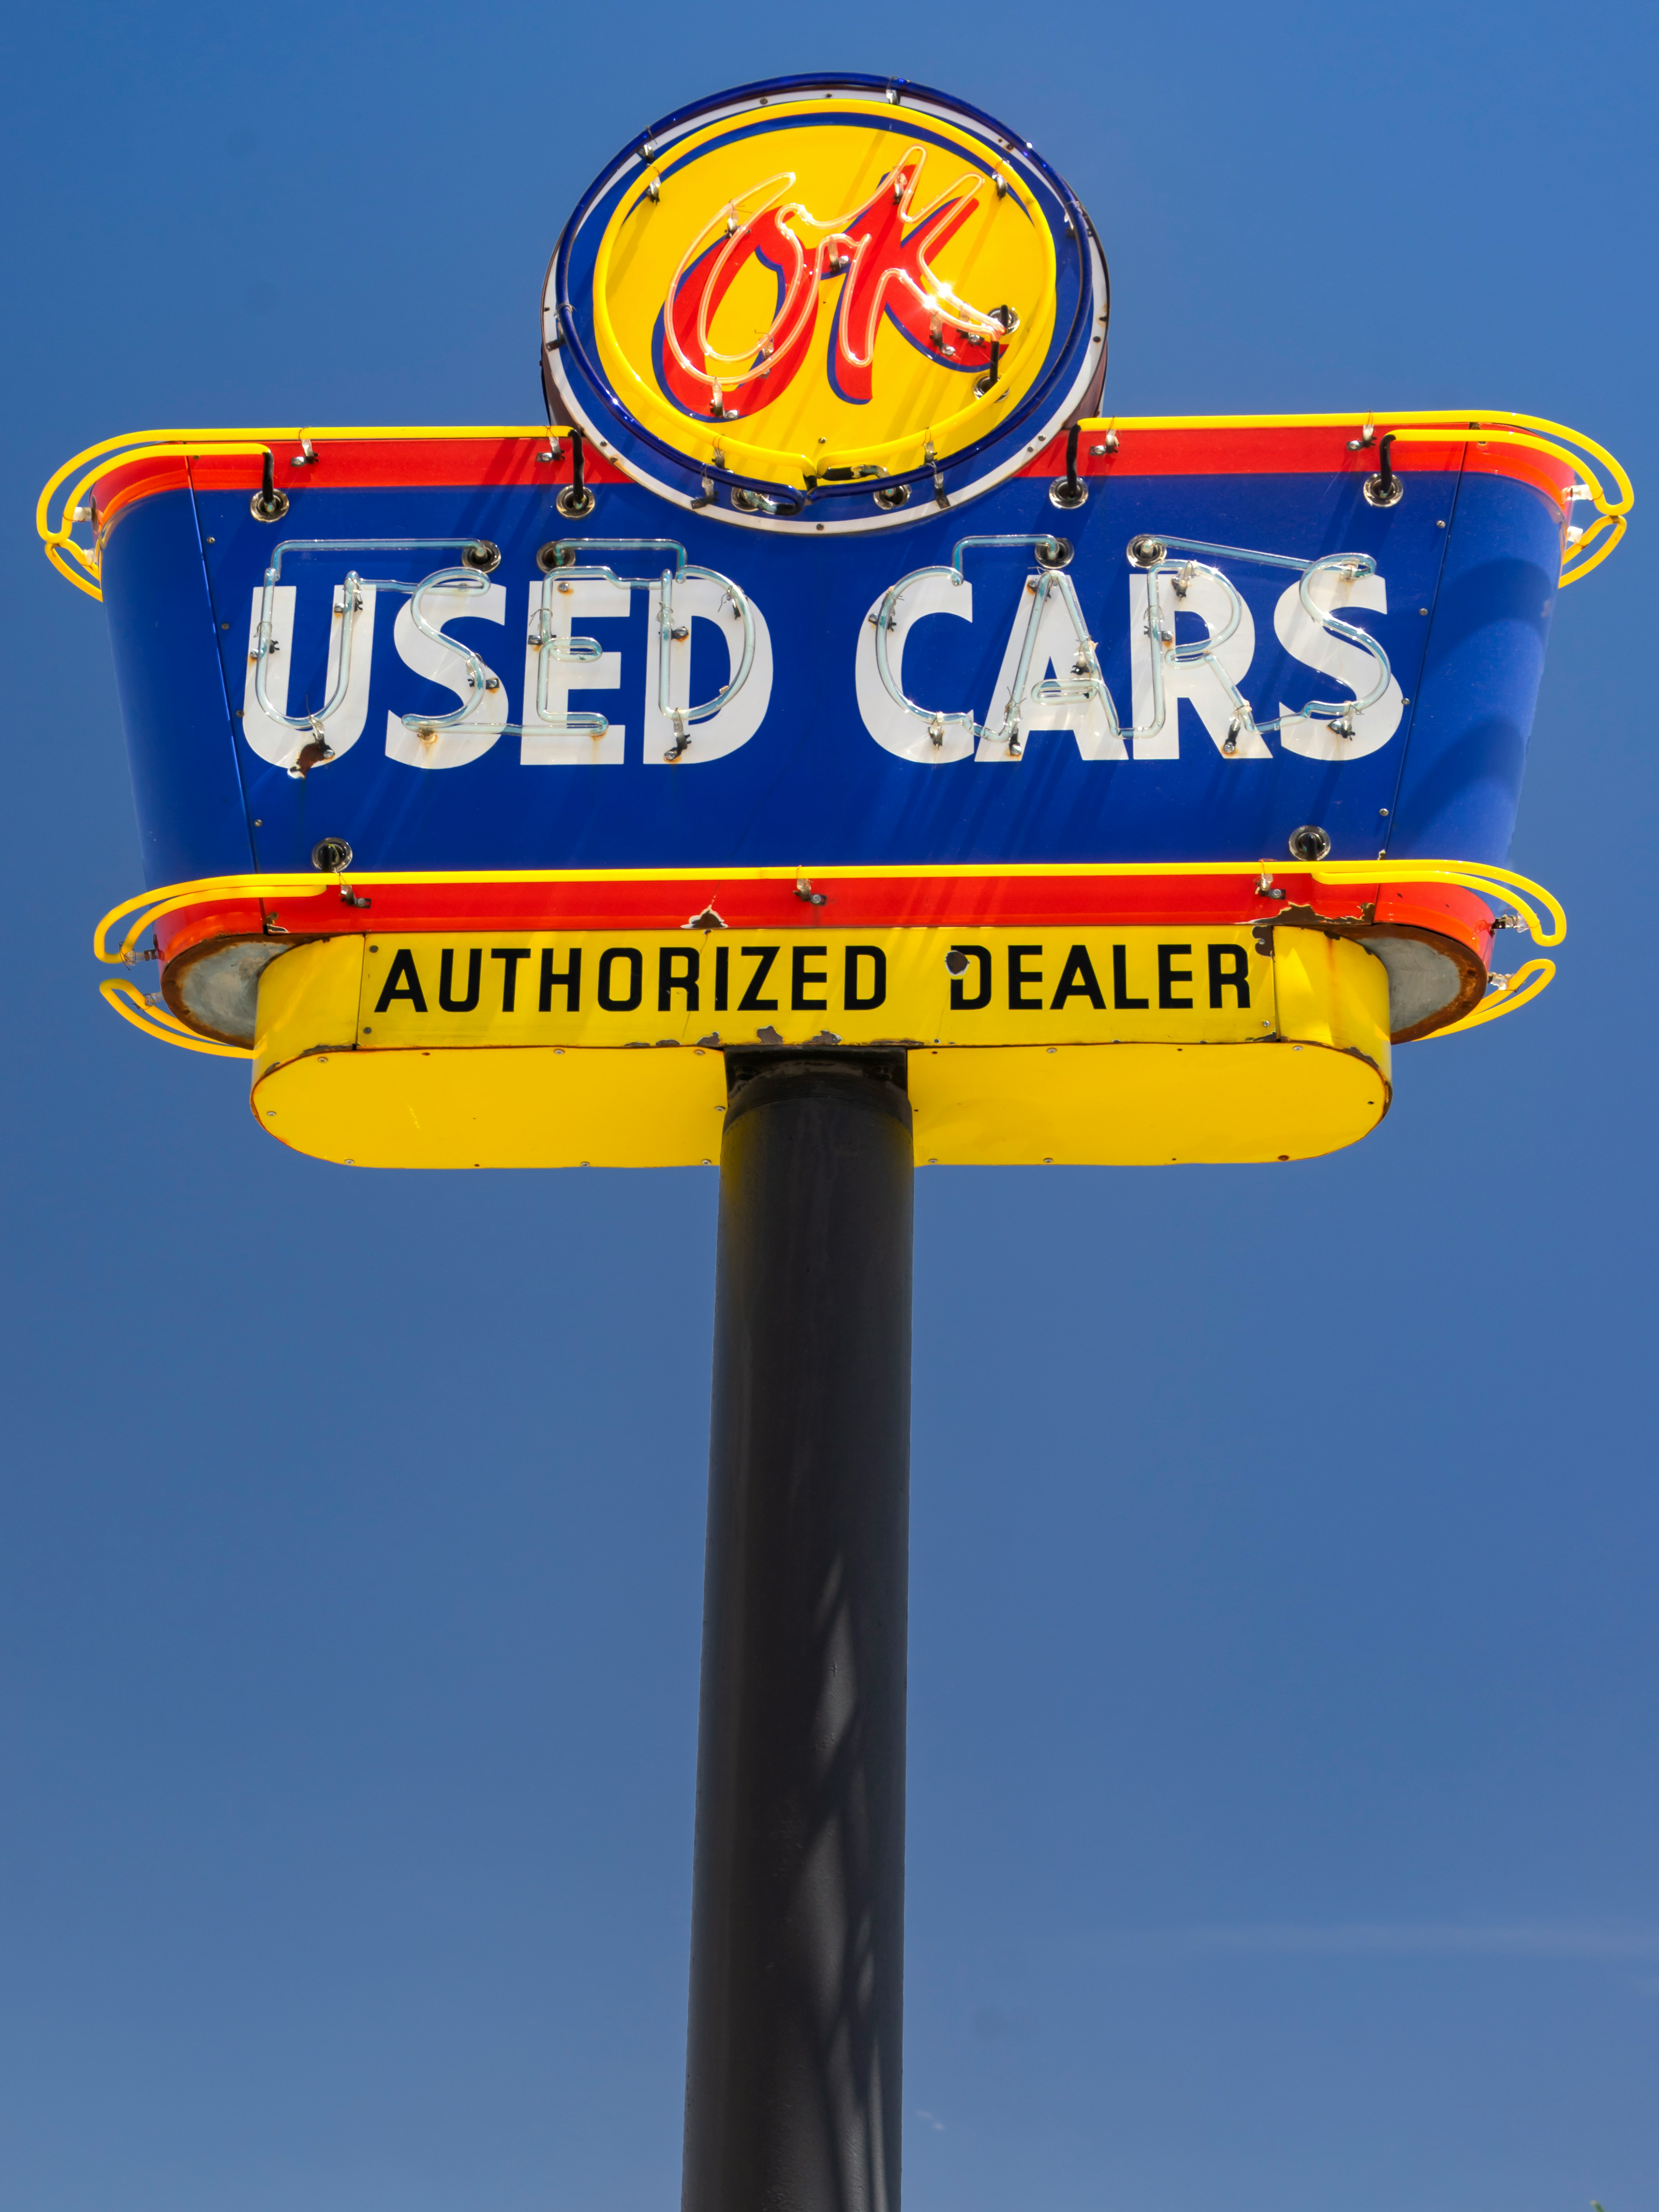 This antique sign is used by a classic car restorer to advertised their business in Kingman, Arizona.